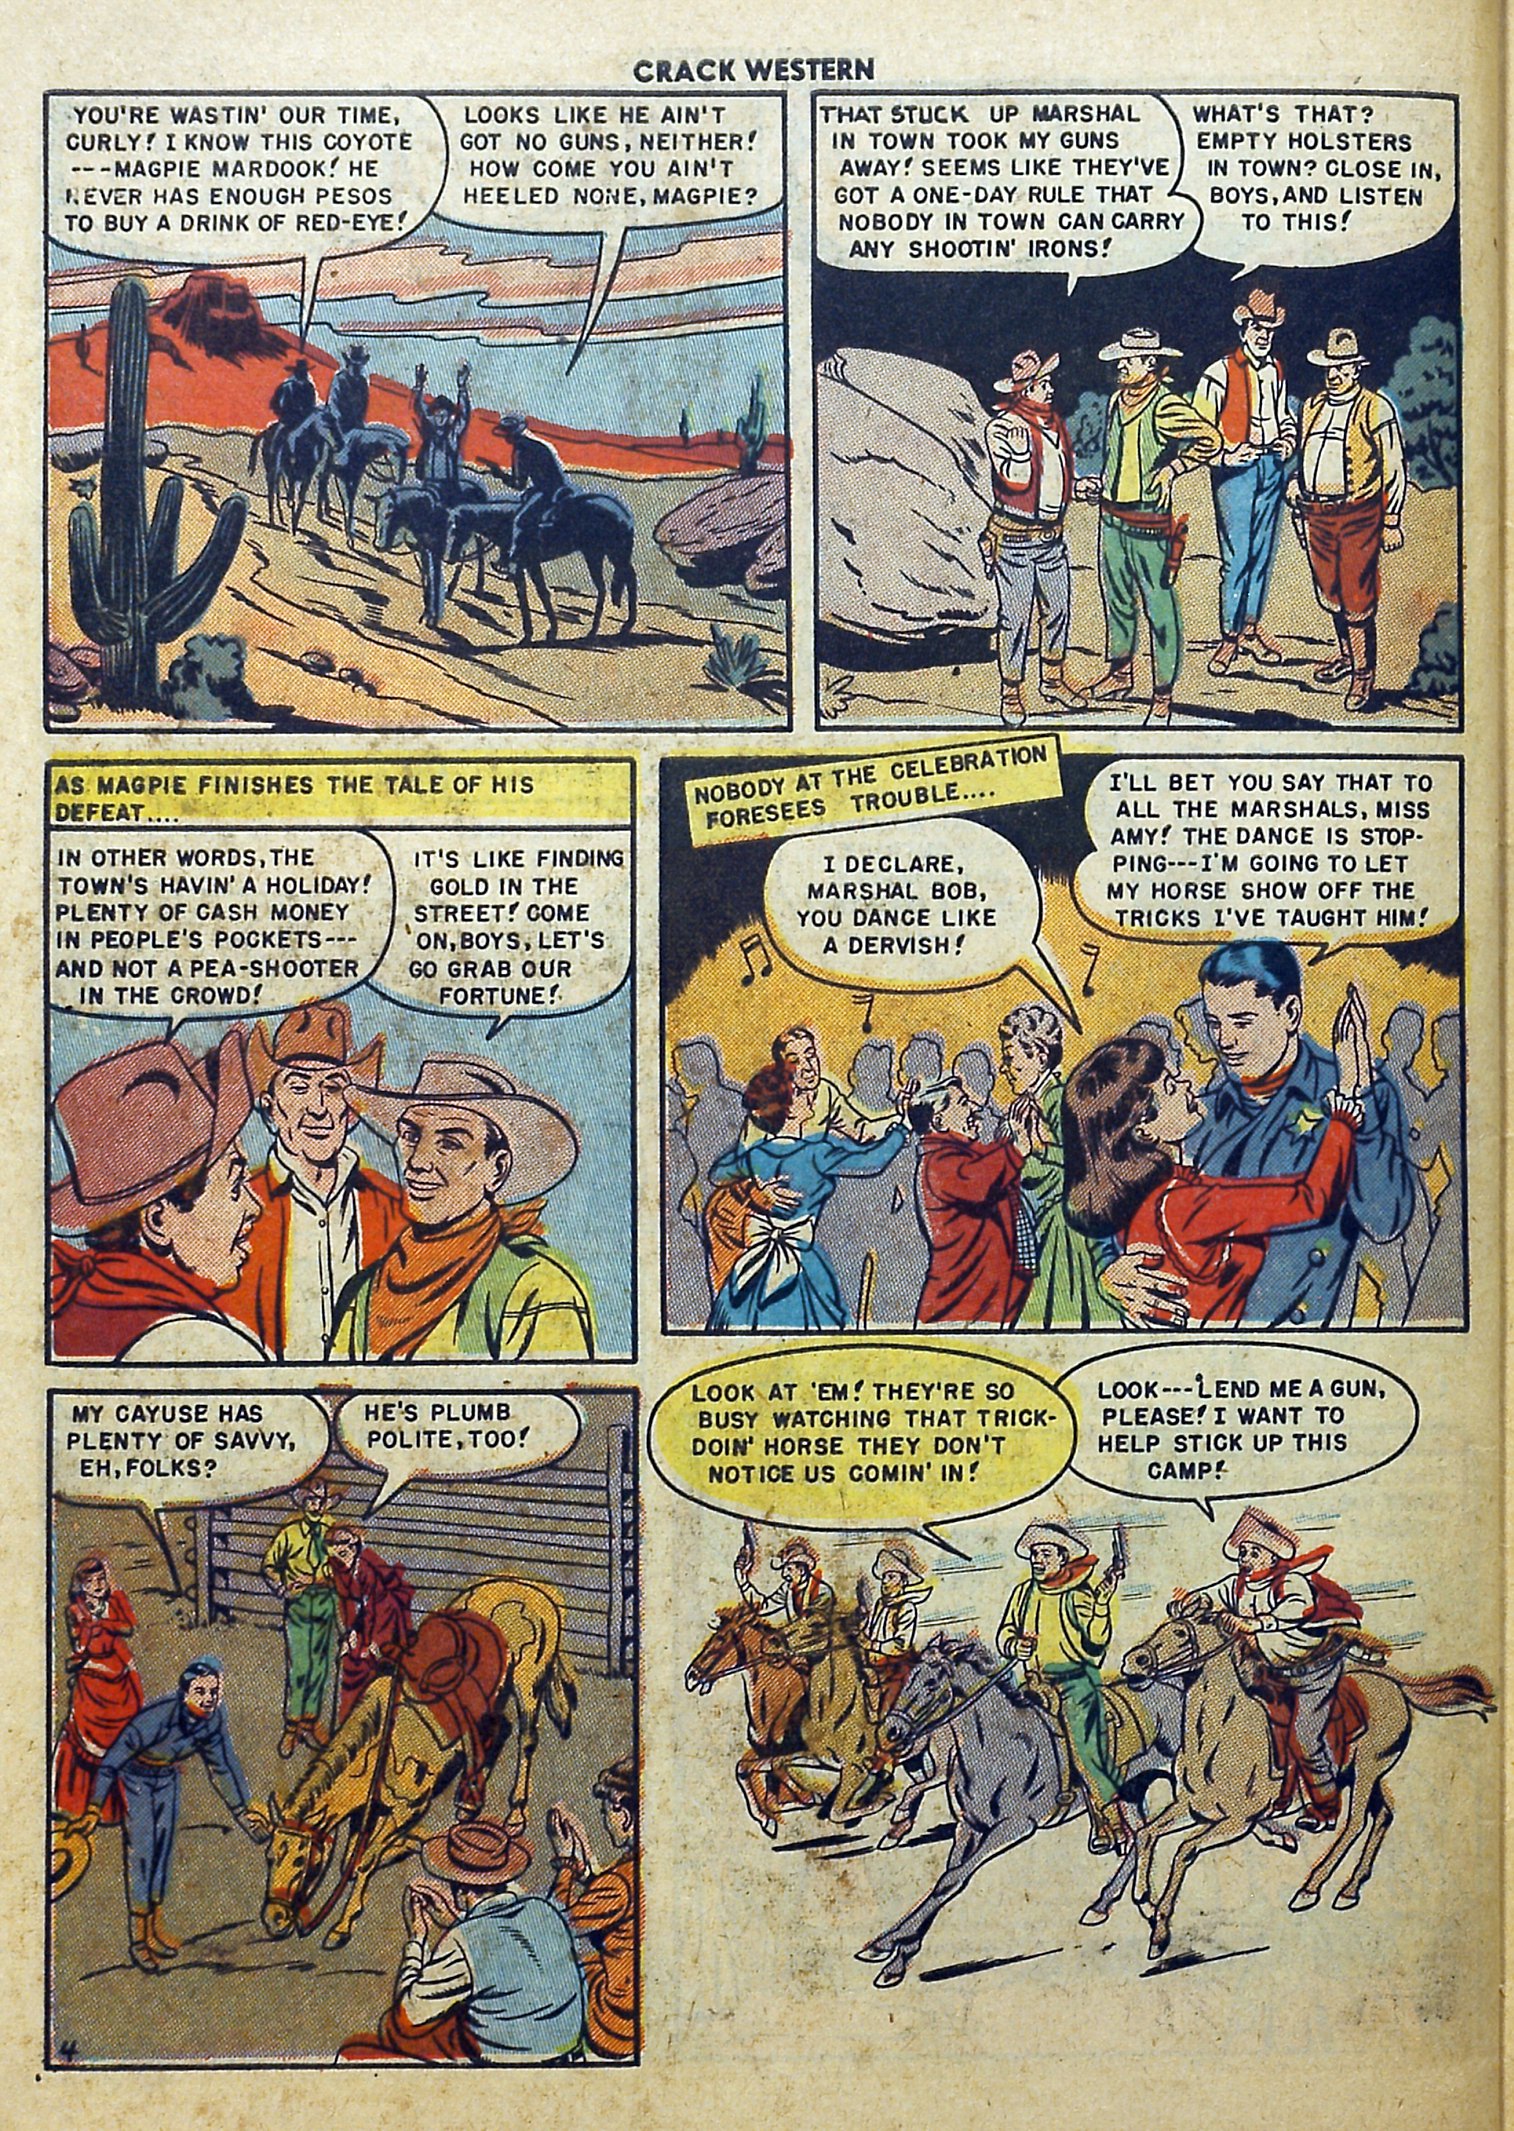 Read online Crack Western comic -  Issue #65 - 30